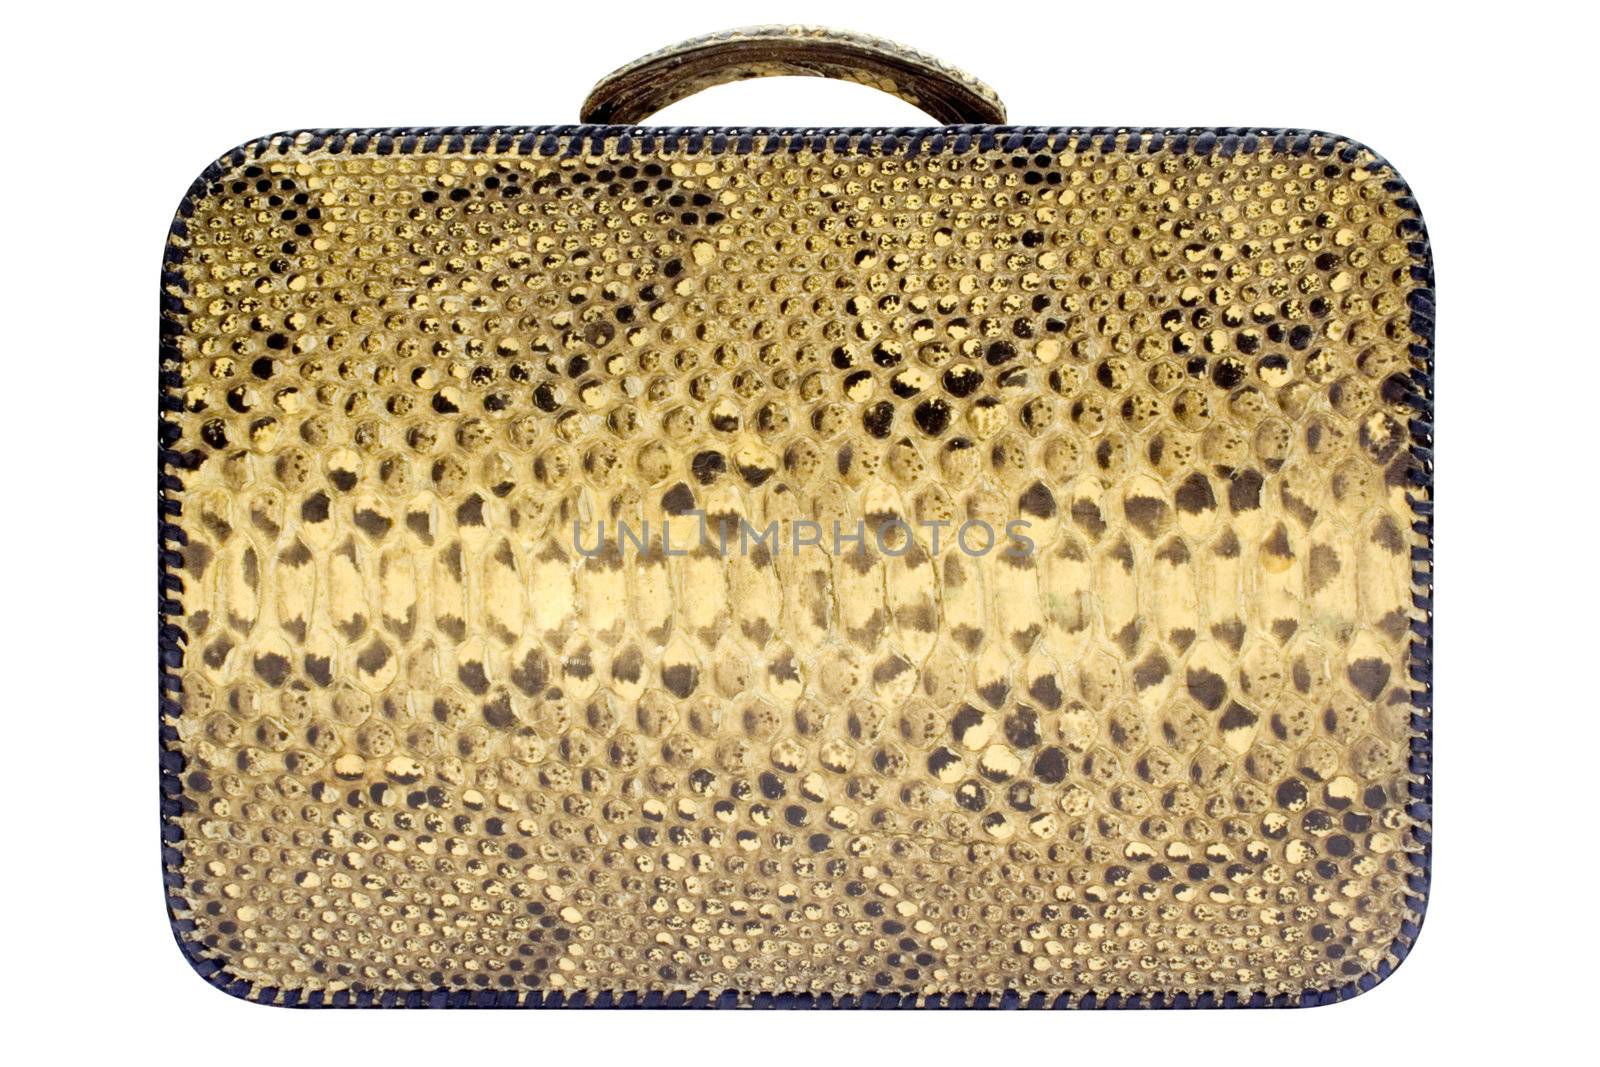 Snakeskin Bag with Clipping Path by winterling